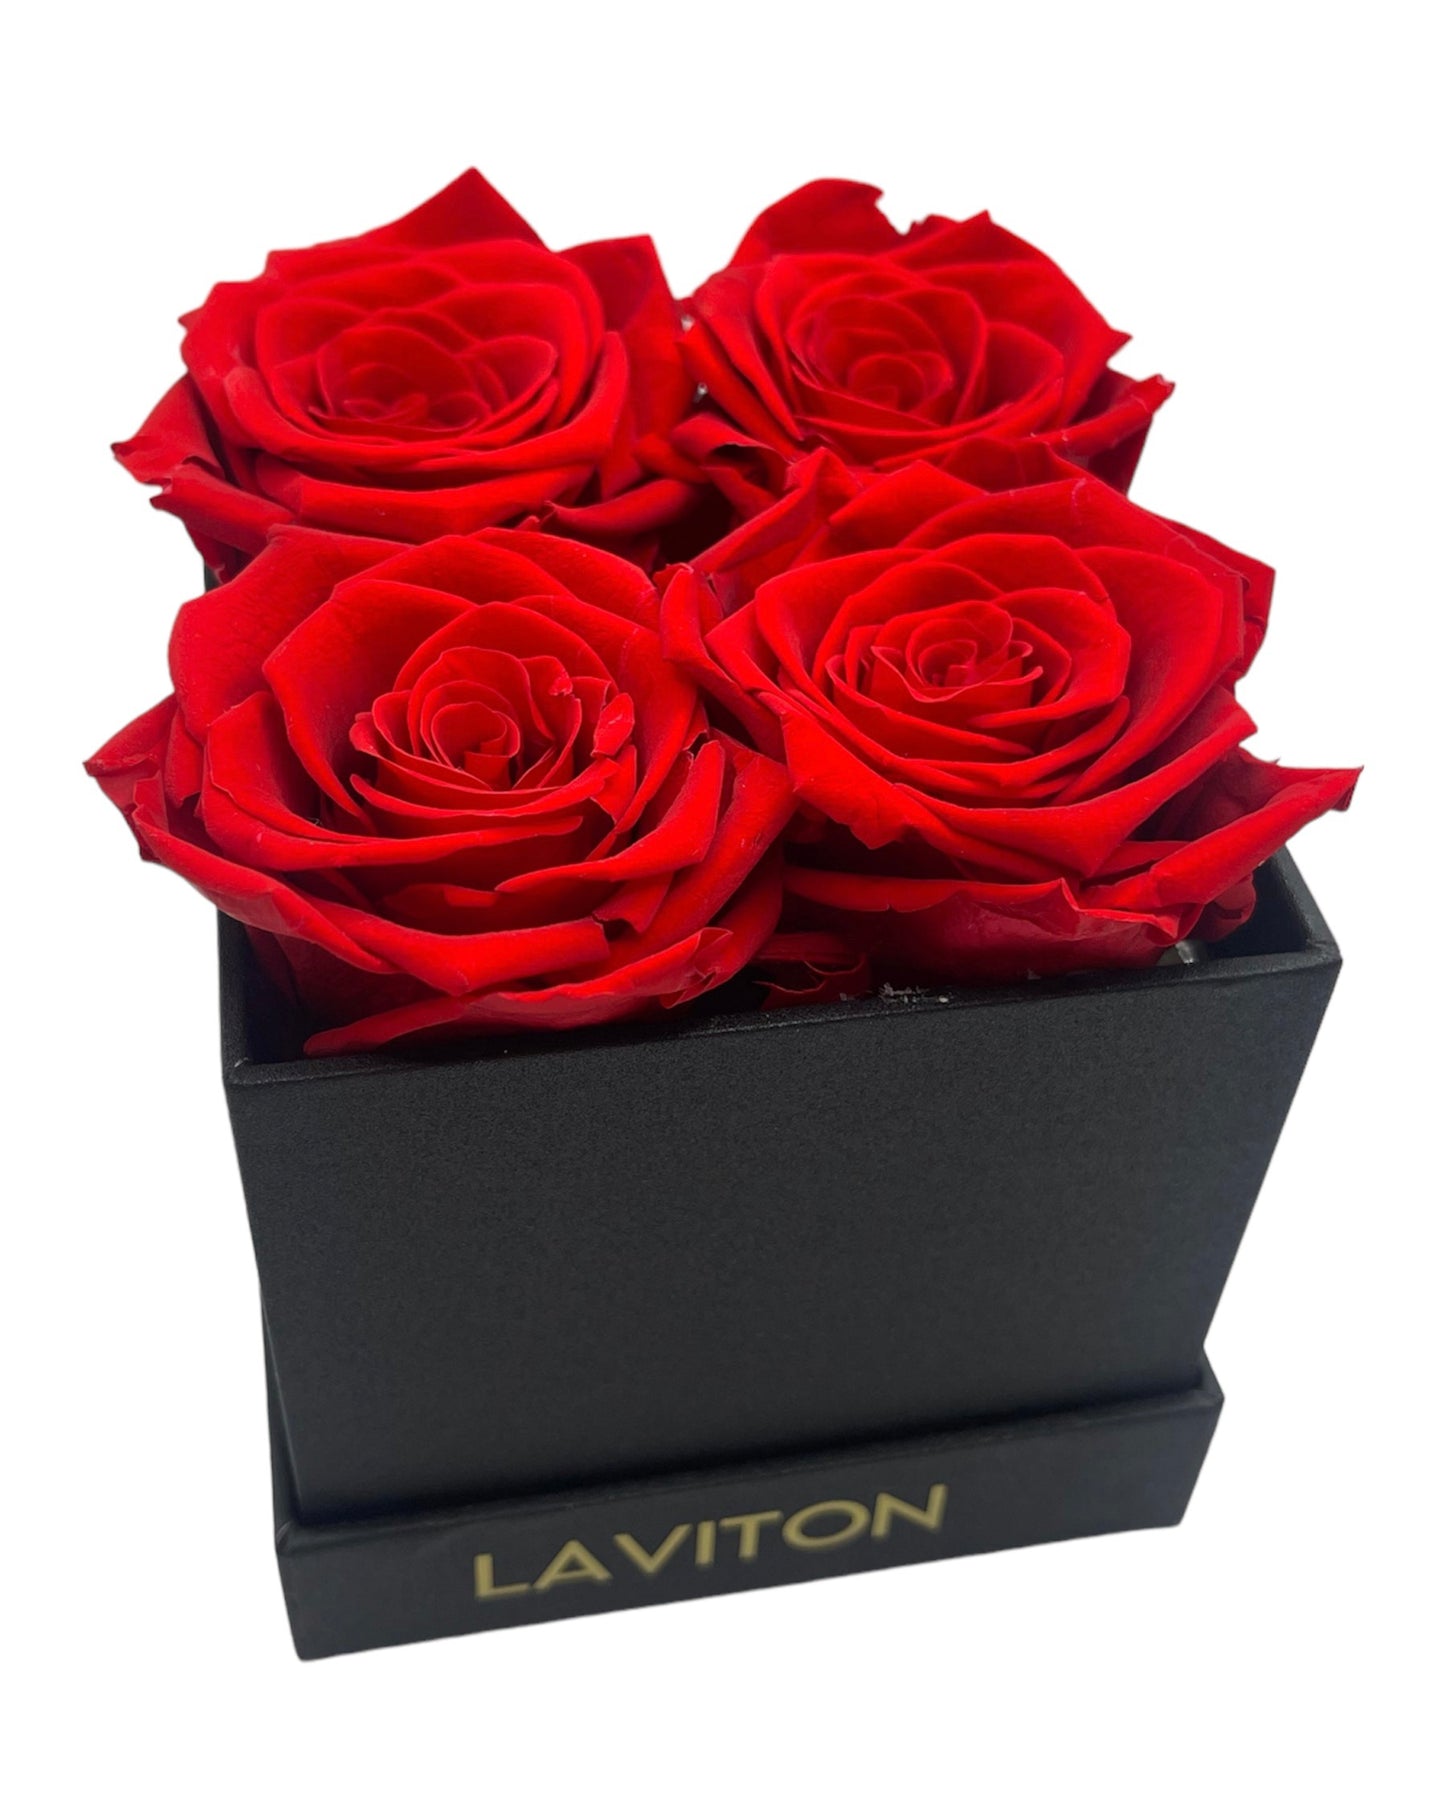 SMALL HOT RED ETERNITY ROSES BOX